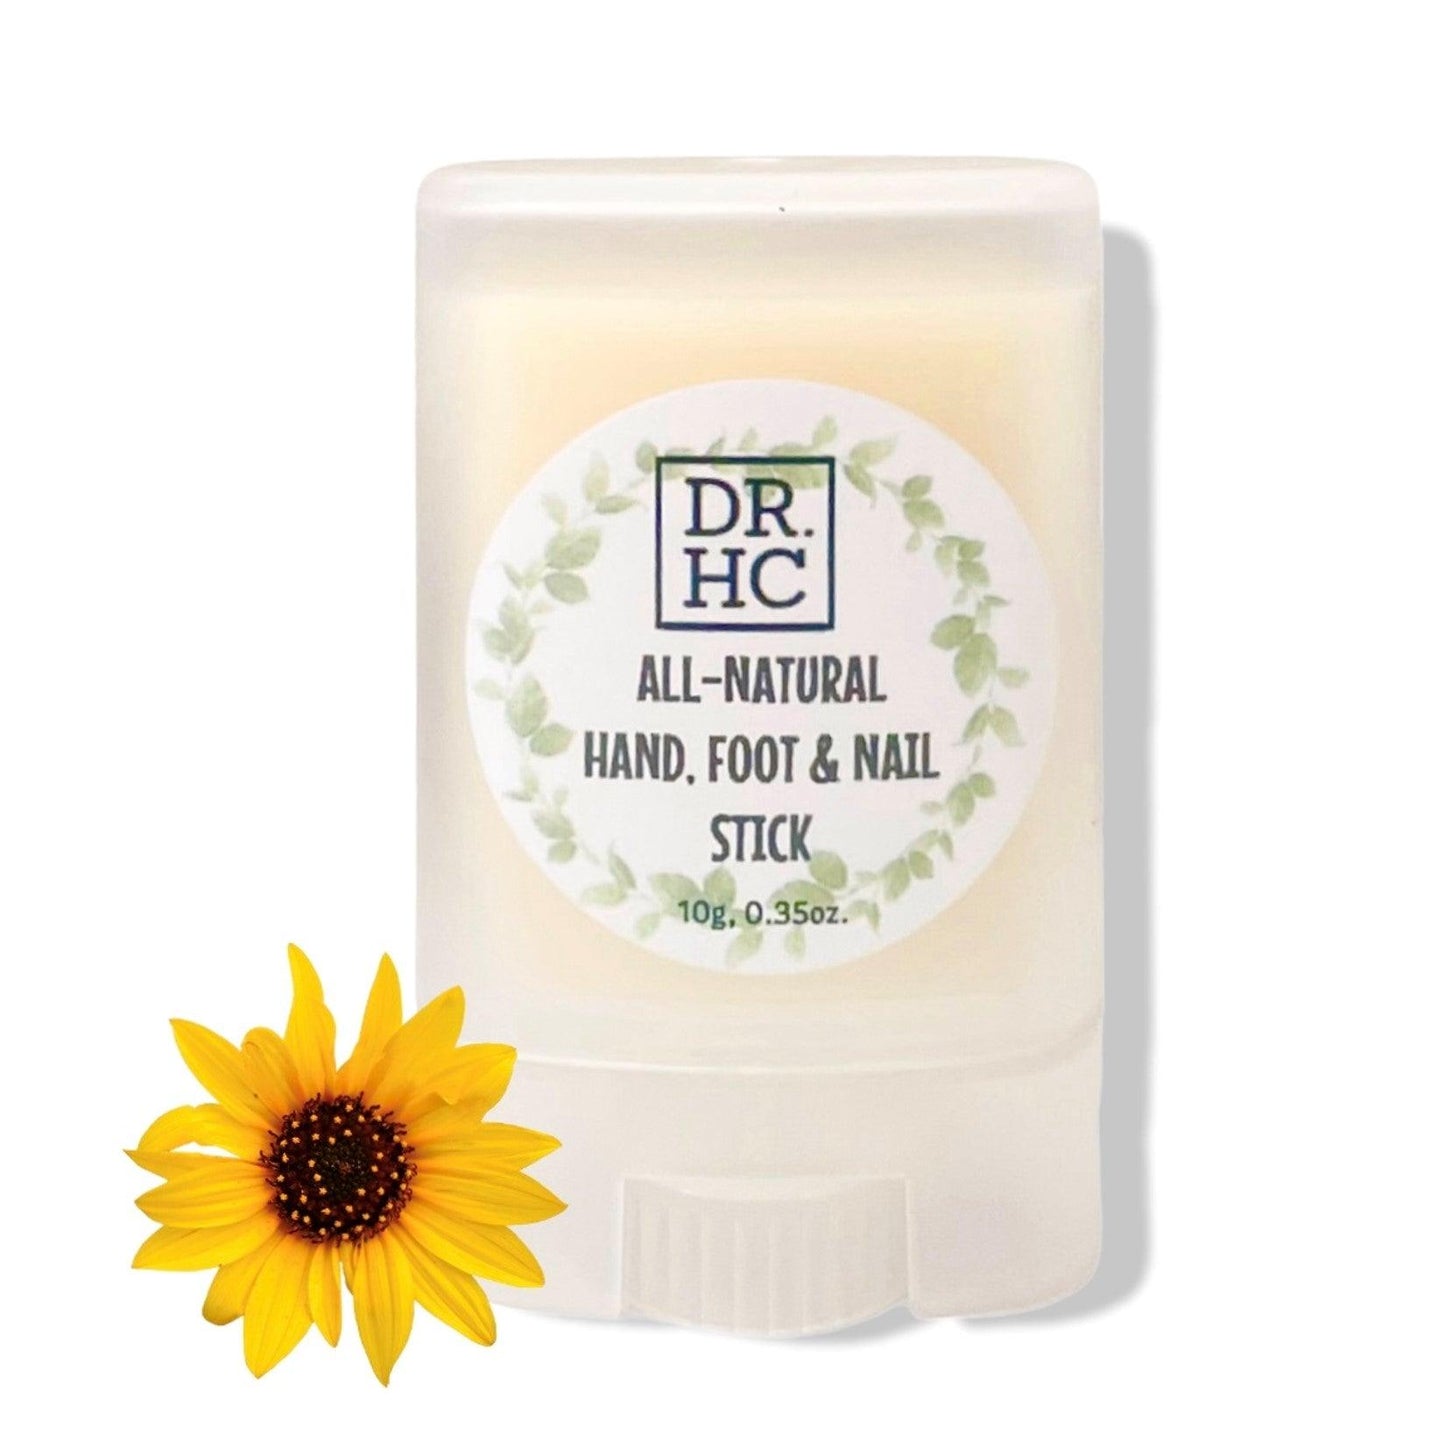 DR.HC All-Natural Hand Foot & Nail Stick (10g, 0.35oz) (Moisturizing, Dead Skin Removing, Damage Repair, Anti-aging...)